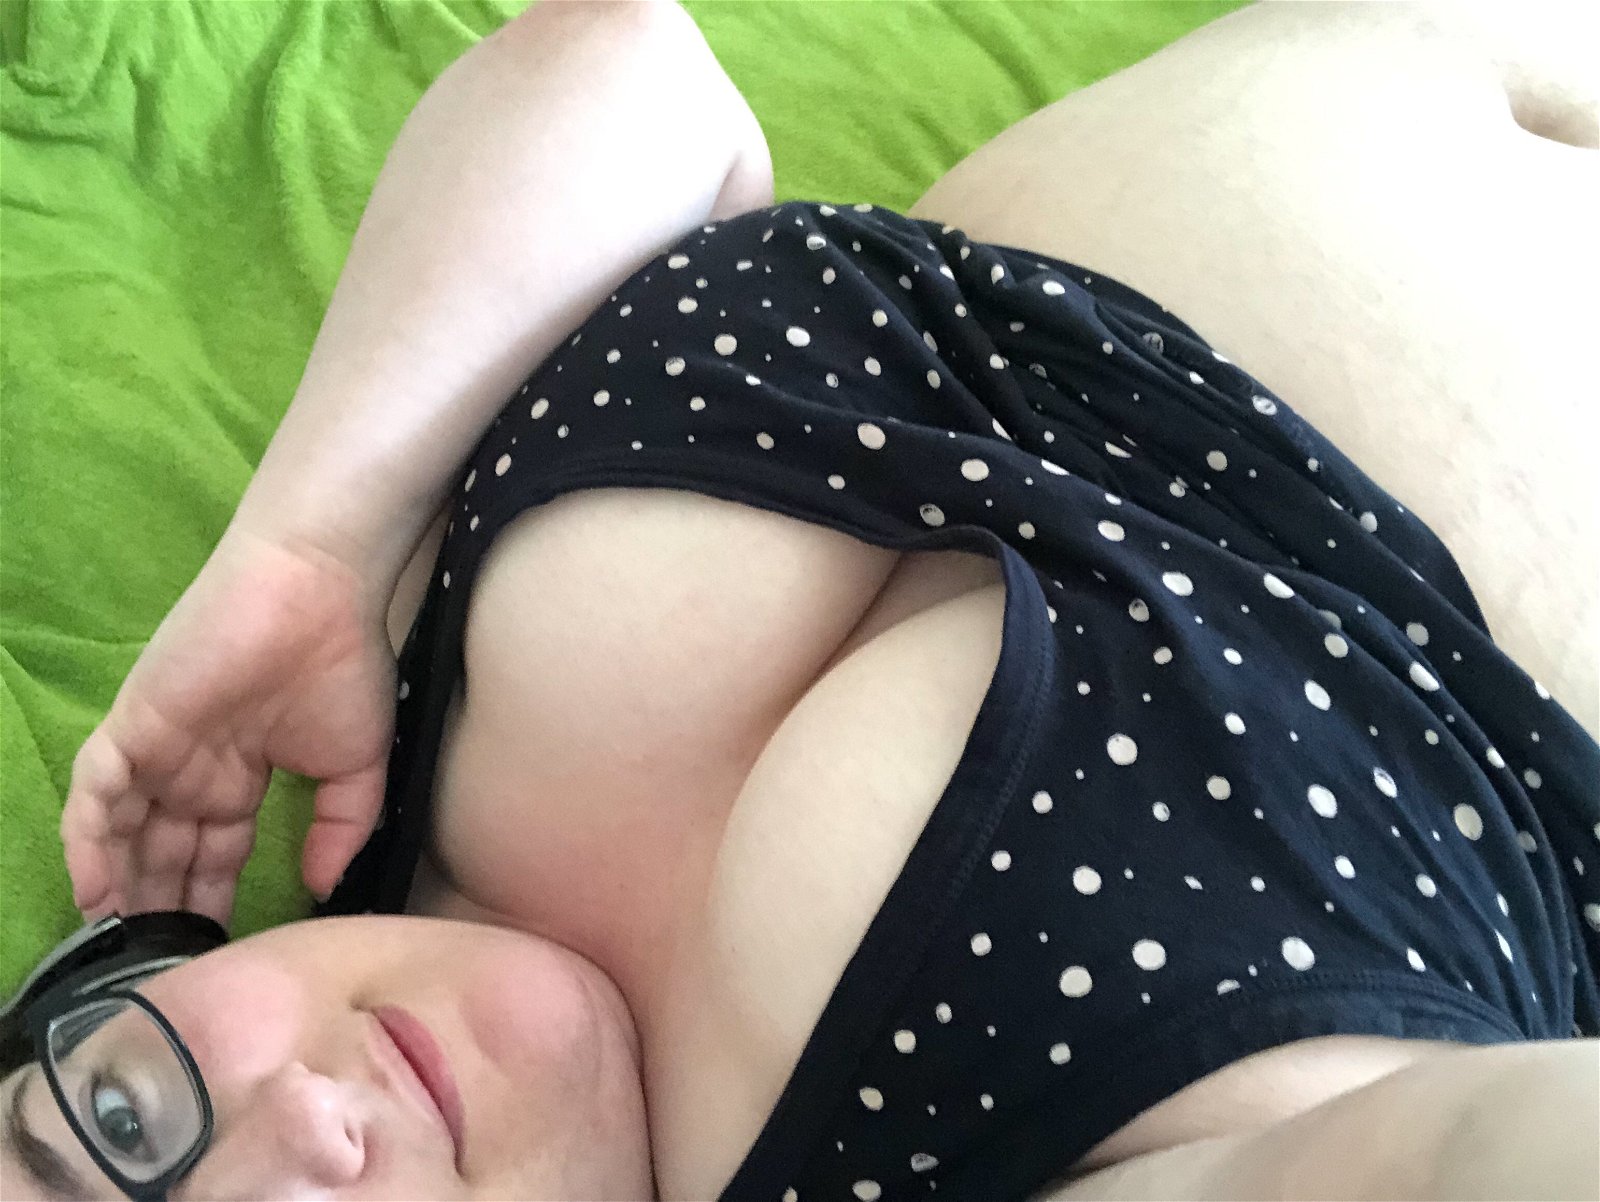 Photo by thegoodhausfrau with the username @thegoodhausfrau, who is a star user,  June 19, 2019 at 7:53 AM. The post is about the topic BBW and the text says 'Moons'